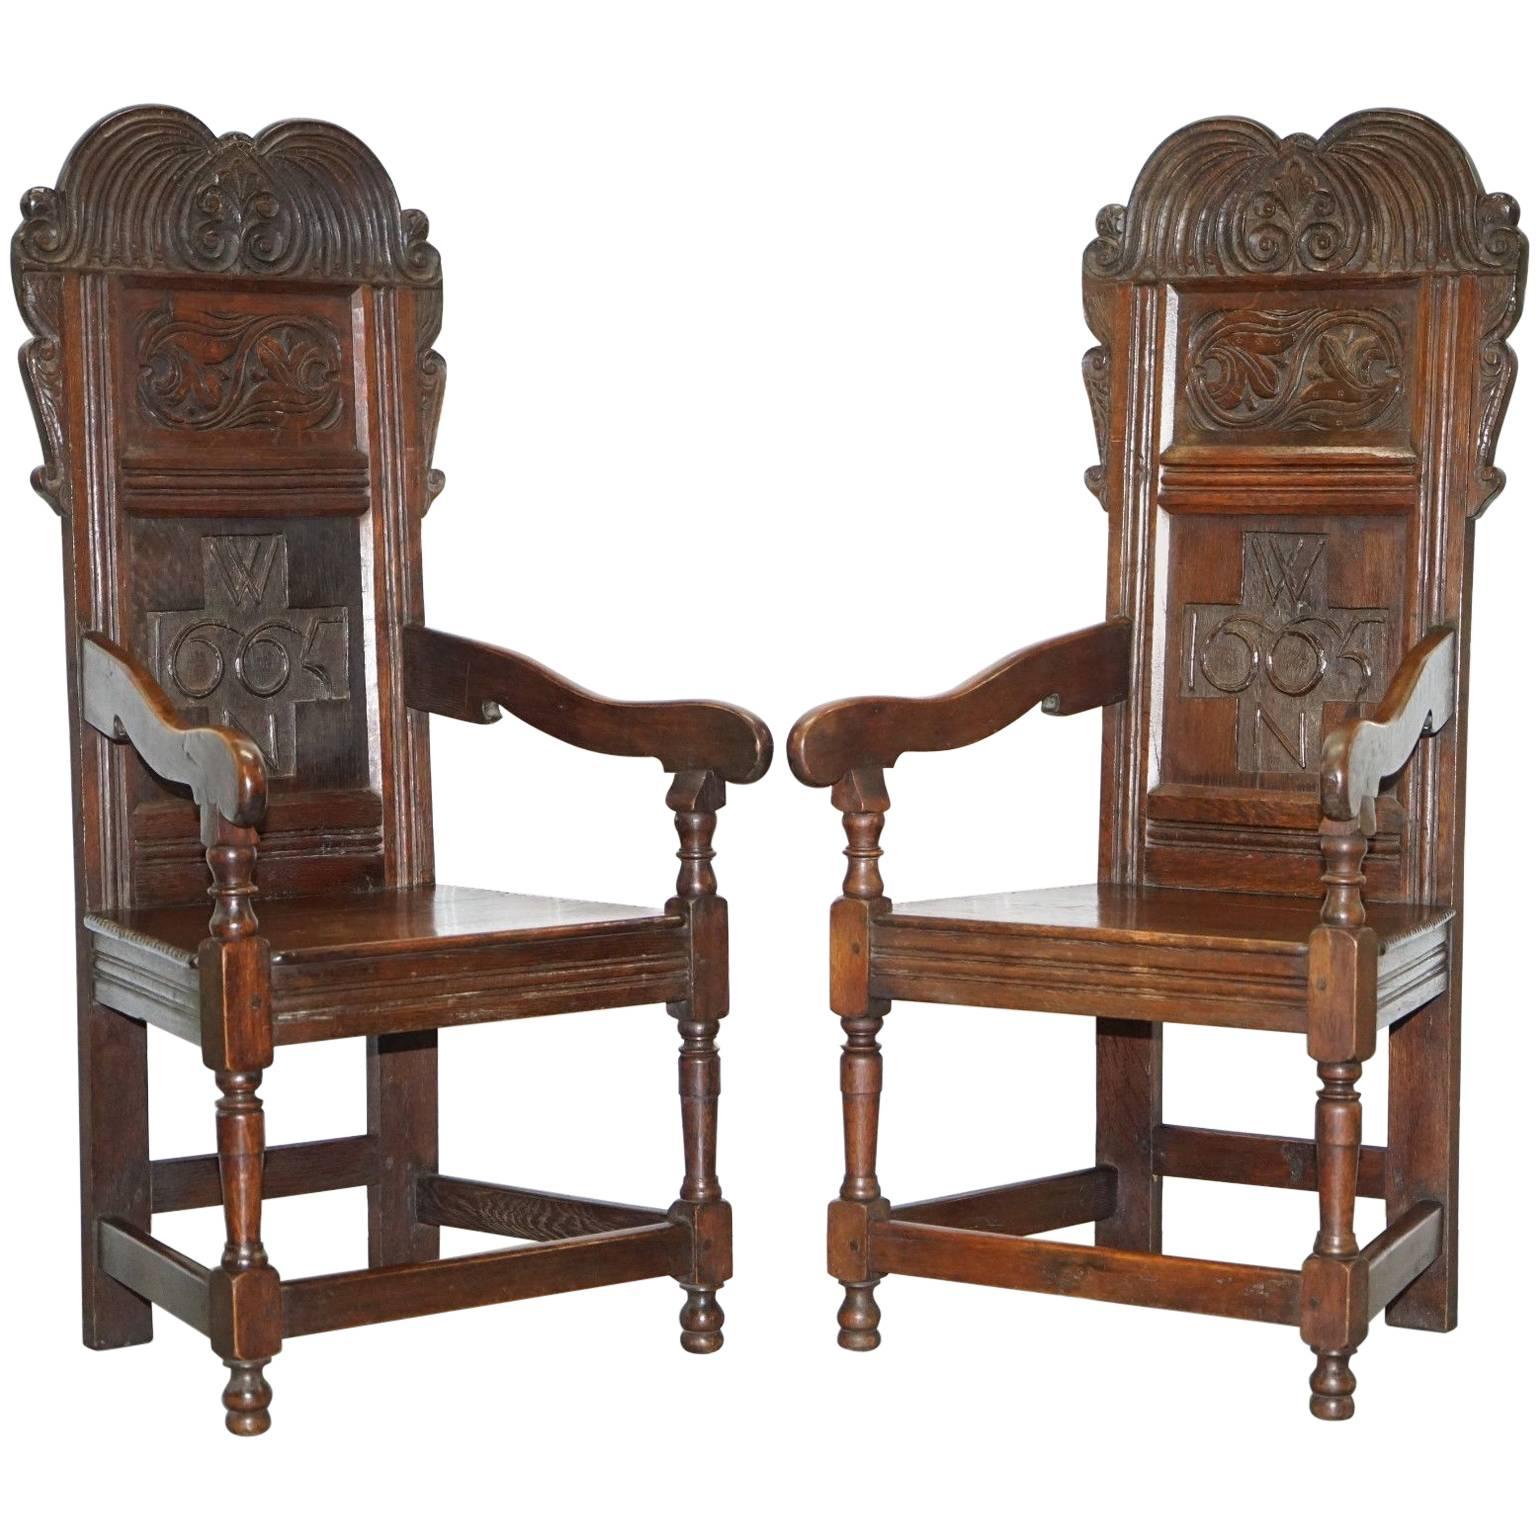 Pair of Charles II Original 1665 Dated Wainscot Armchairs English Carved Oak